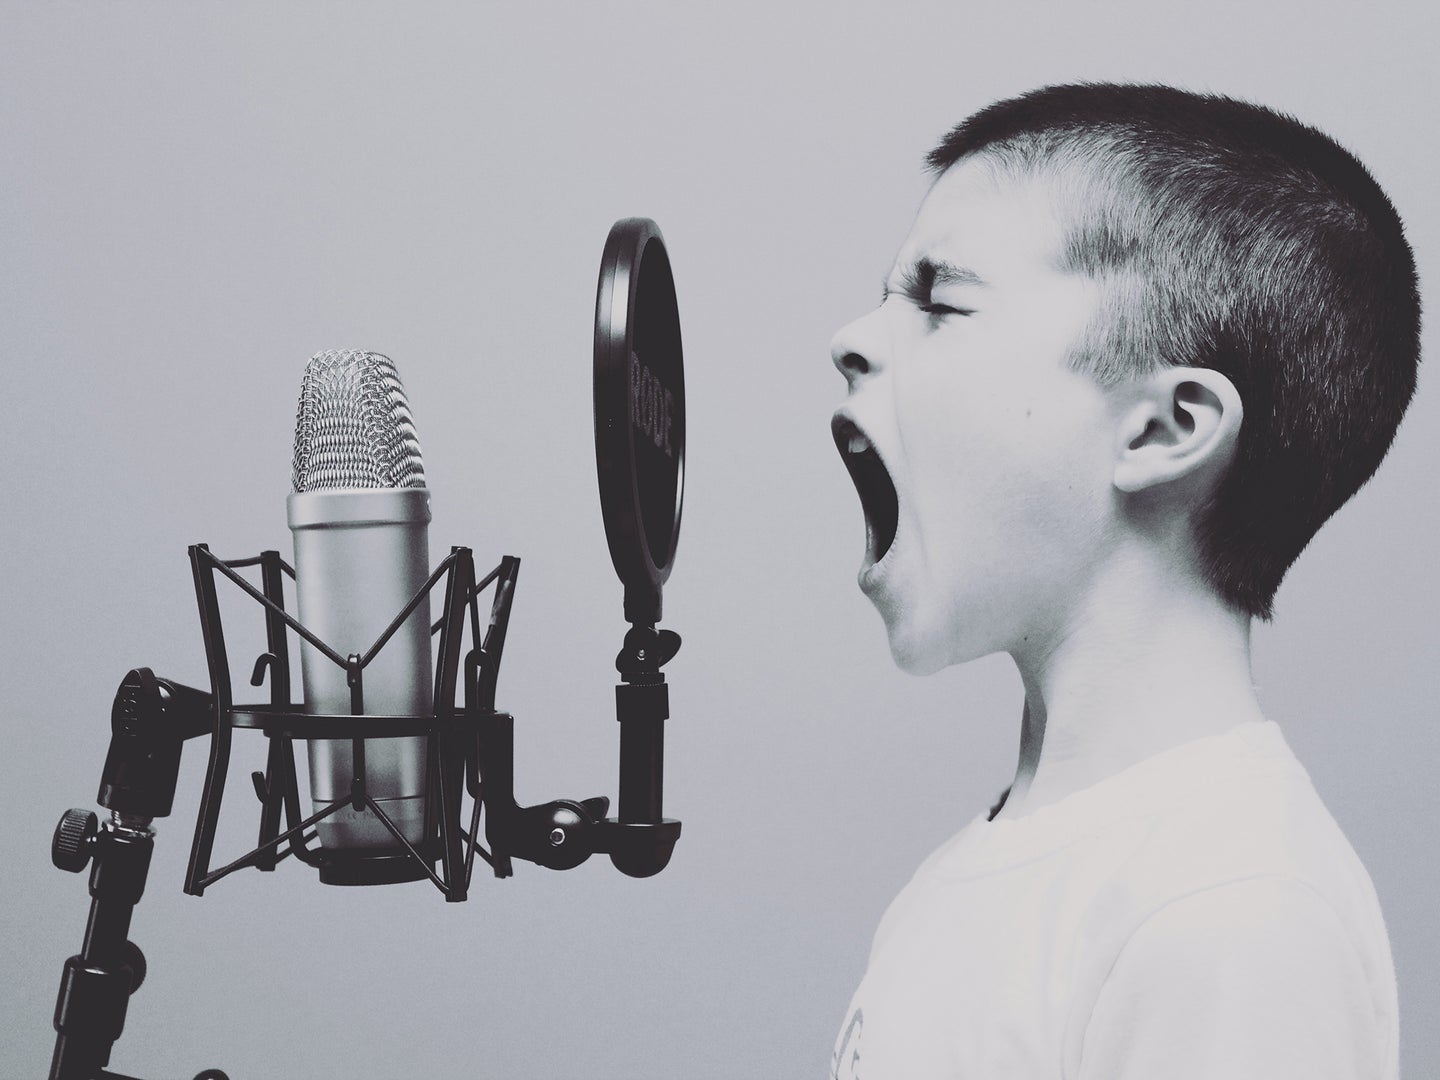 A child with a shaved head and white shirt shouting or singing into a mice with a pop filter in front of it.